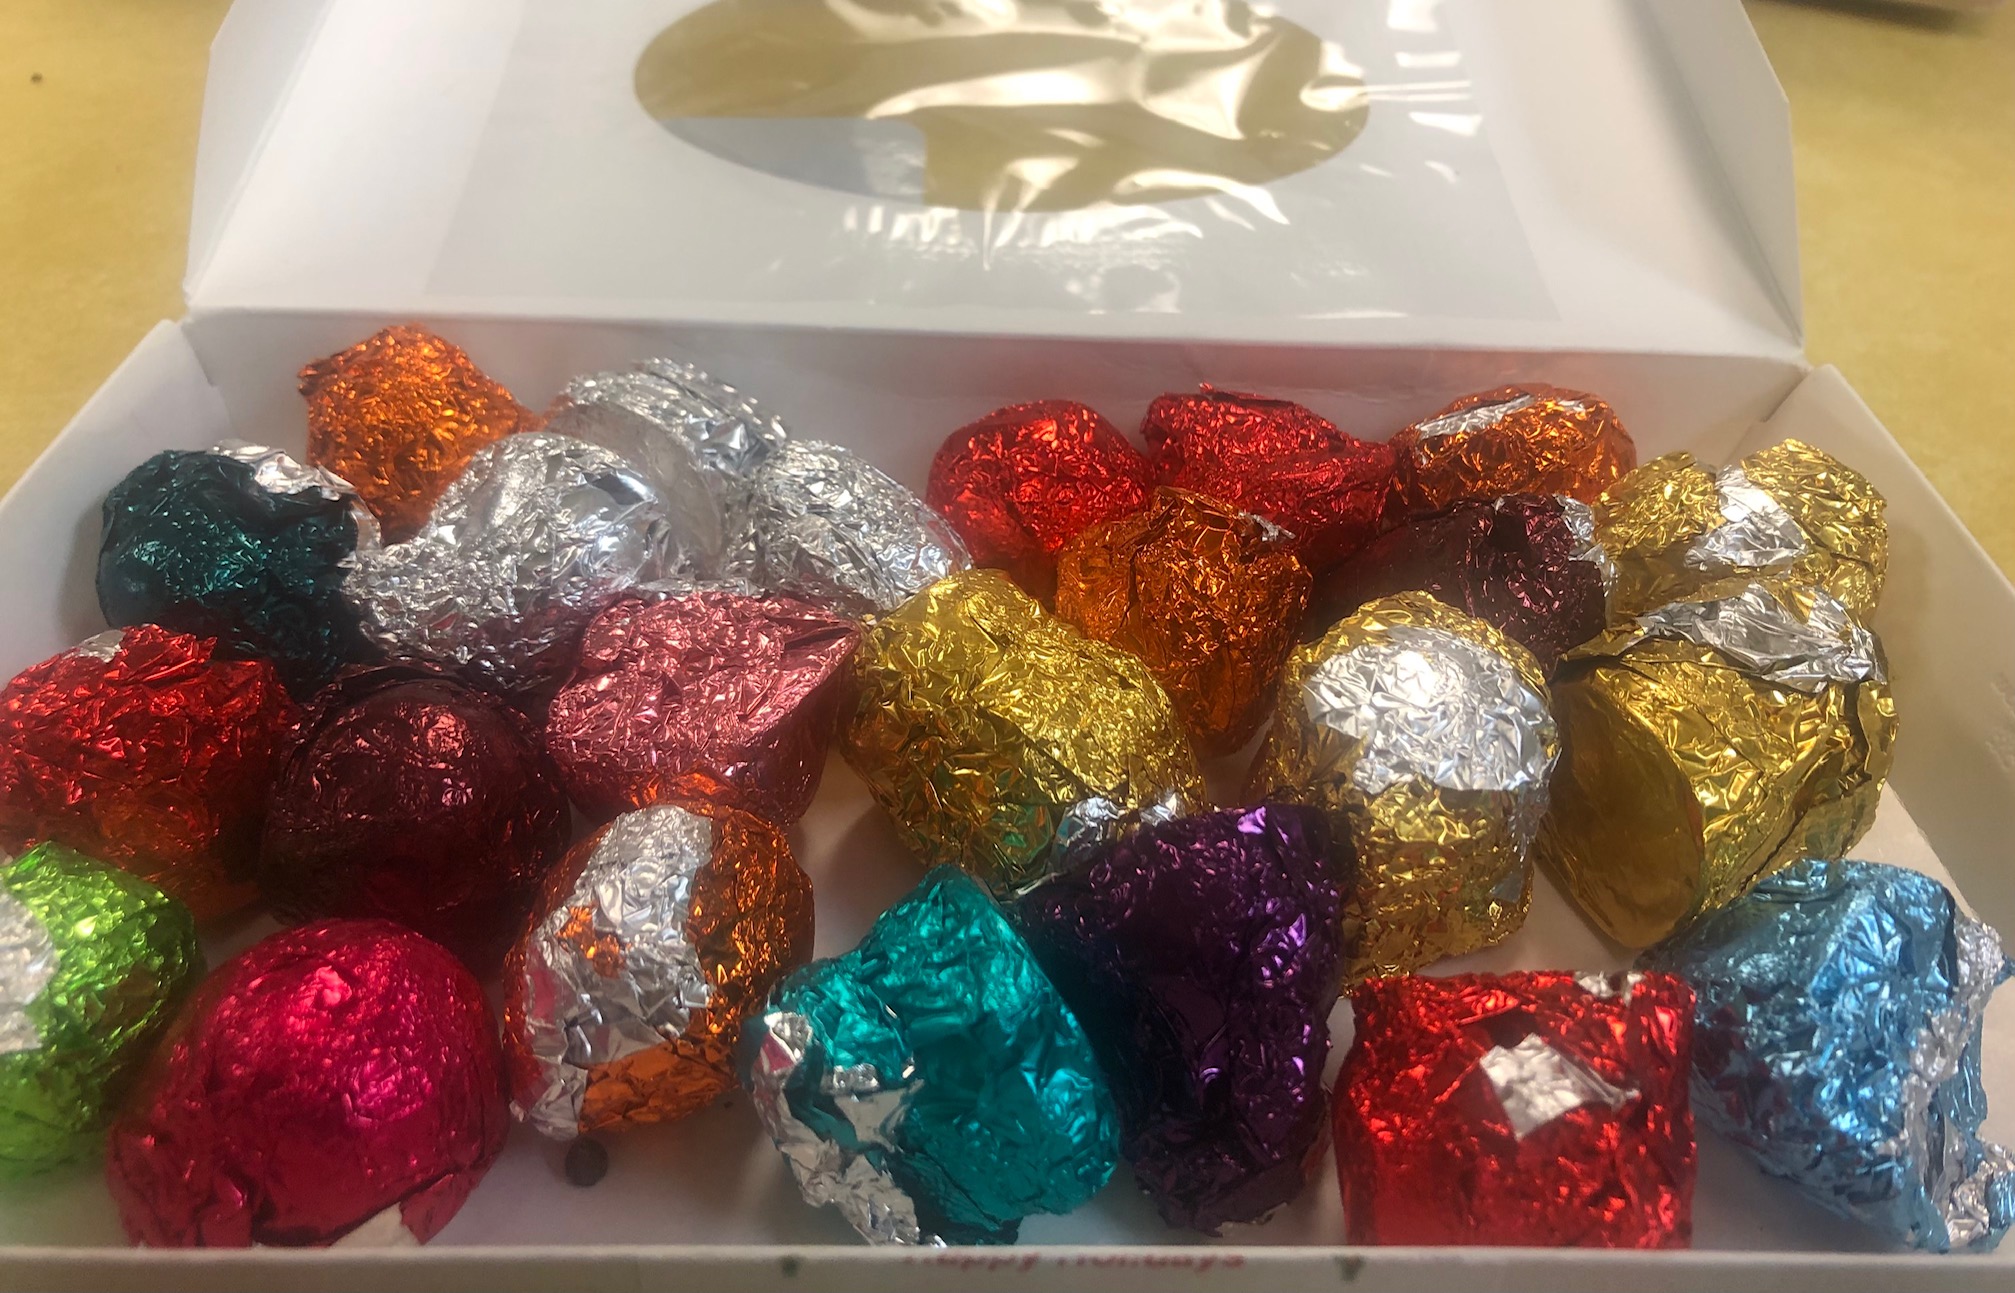 This image shows several homemade truffles wrapped in different colors